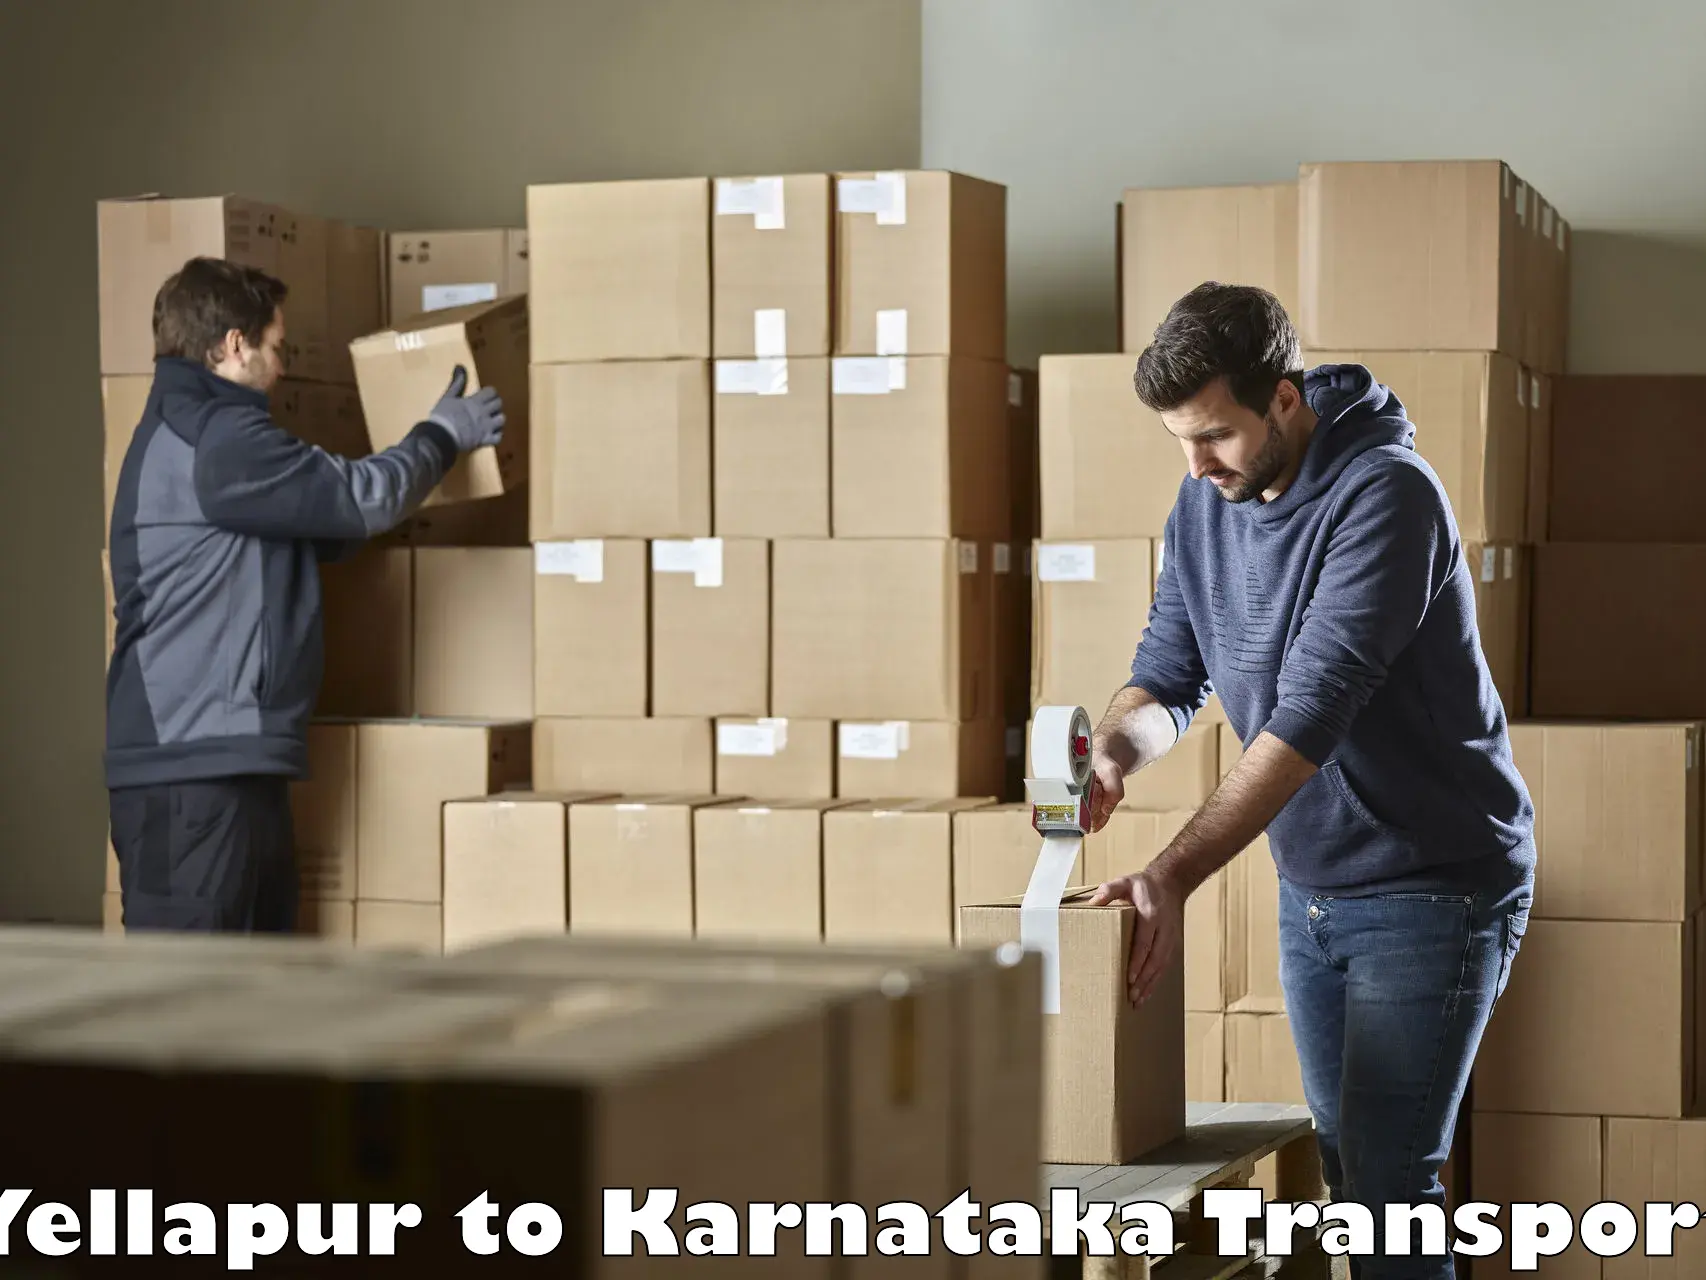 Truck transport companies in India Yellapur to Mulbagal